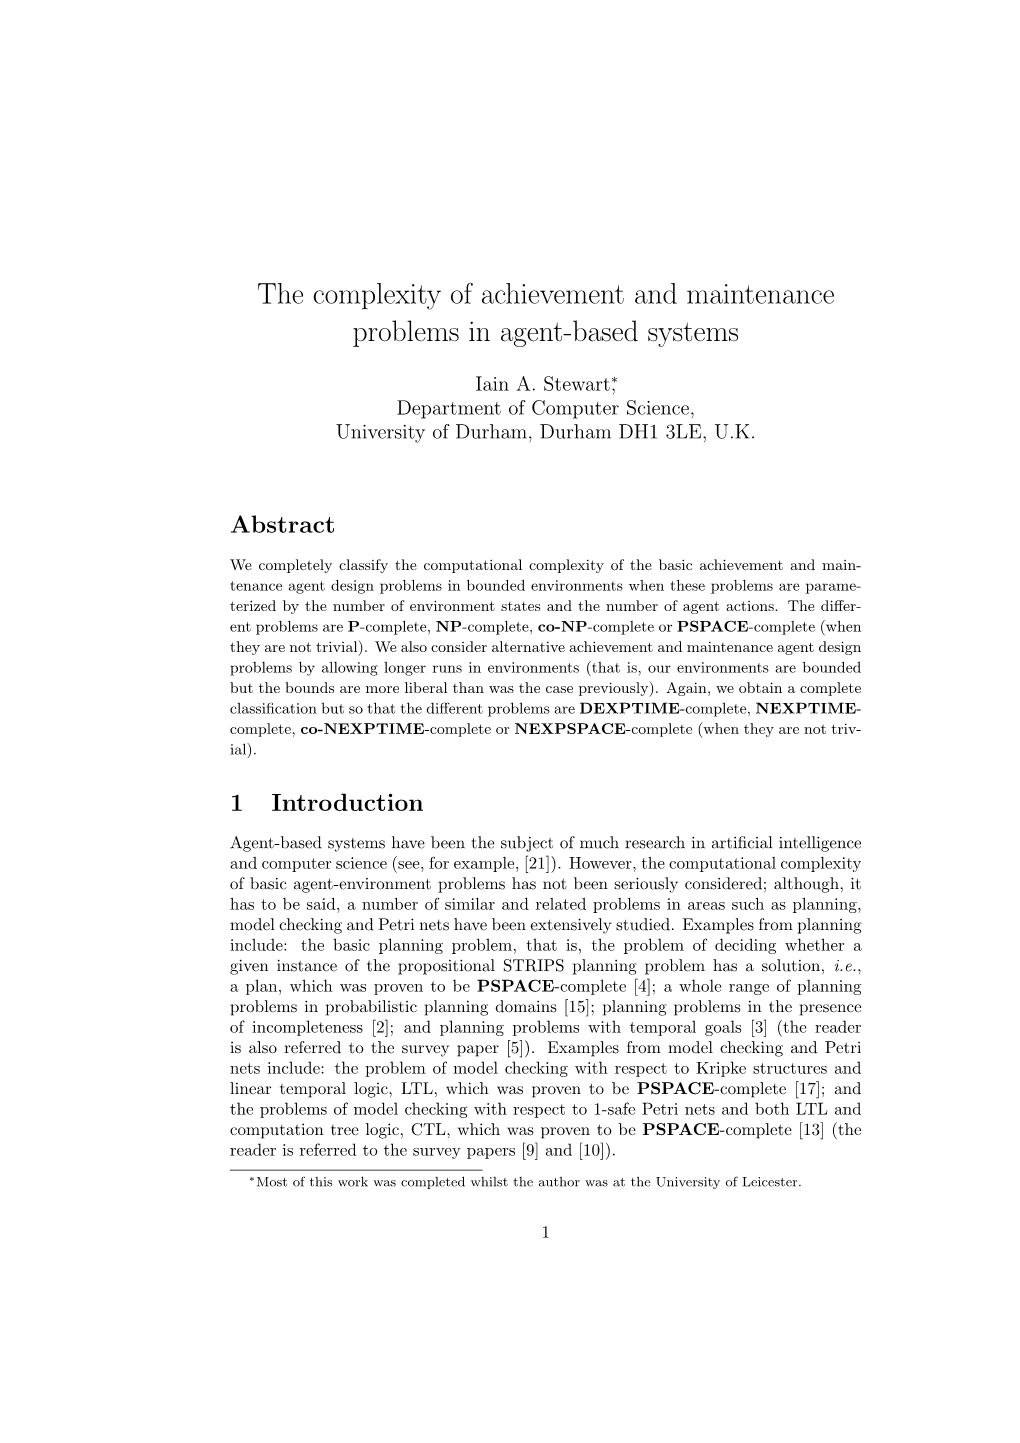 The Complexity of Achievement and Maintenance Problems in Agent-Based Systems